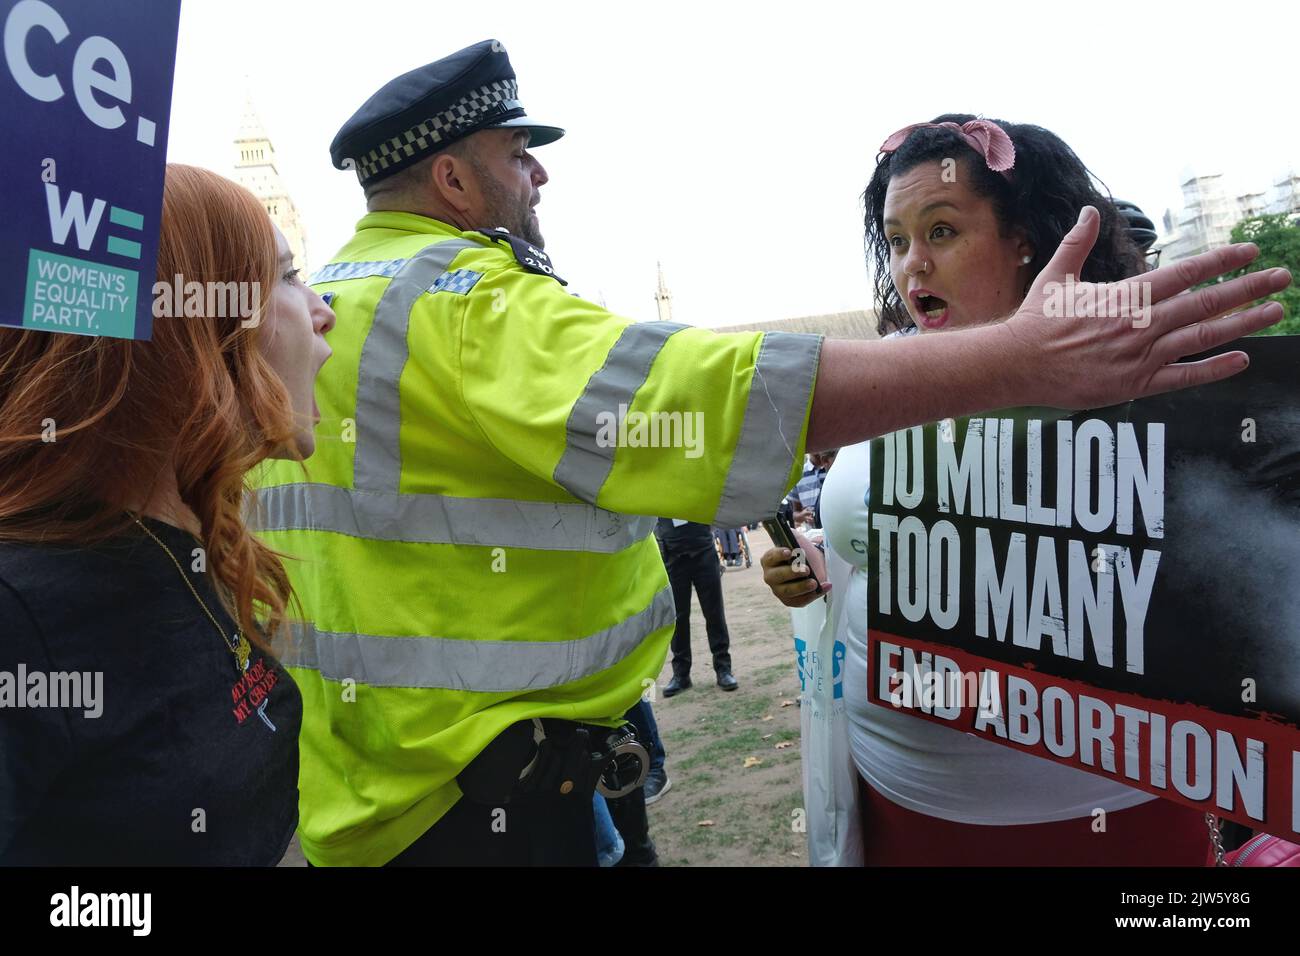 London, UK, 3rd September, 2022. A police officer stands between activist Patsy Stevenson and a pro-life protester as they debate with one another. Women's pro-choice activists assembled on Parliament Square in a counter protest against the annual March for Life event, attended by Evangelical Christians and Catholics amongst others, who oppose abortion, believing life begins from conception. Pro-choice groups say the overturning of Roe v Wade has emboldened anti-abortionists. Credit: Eleventh Hour Photography/Alamy Live News. Stock Photo